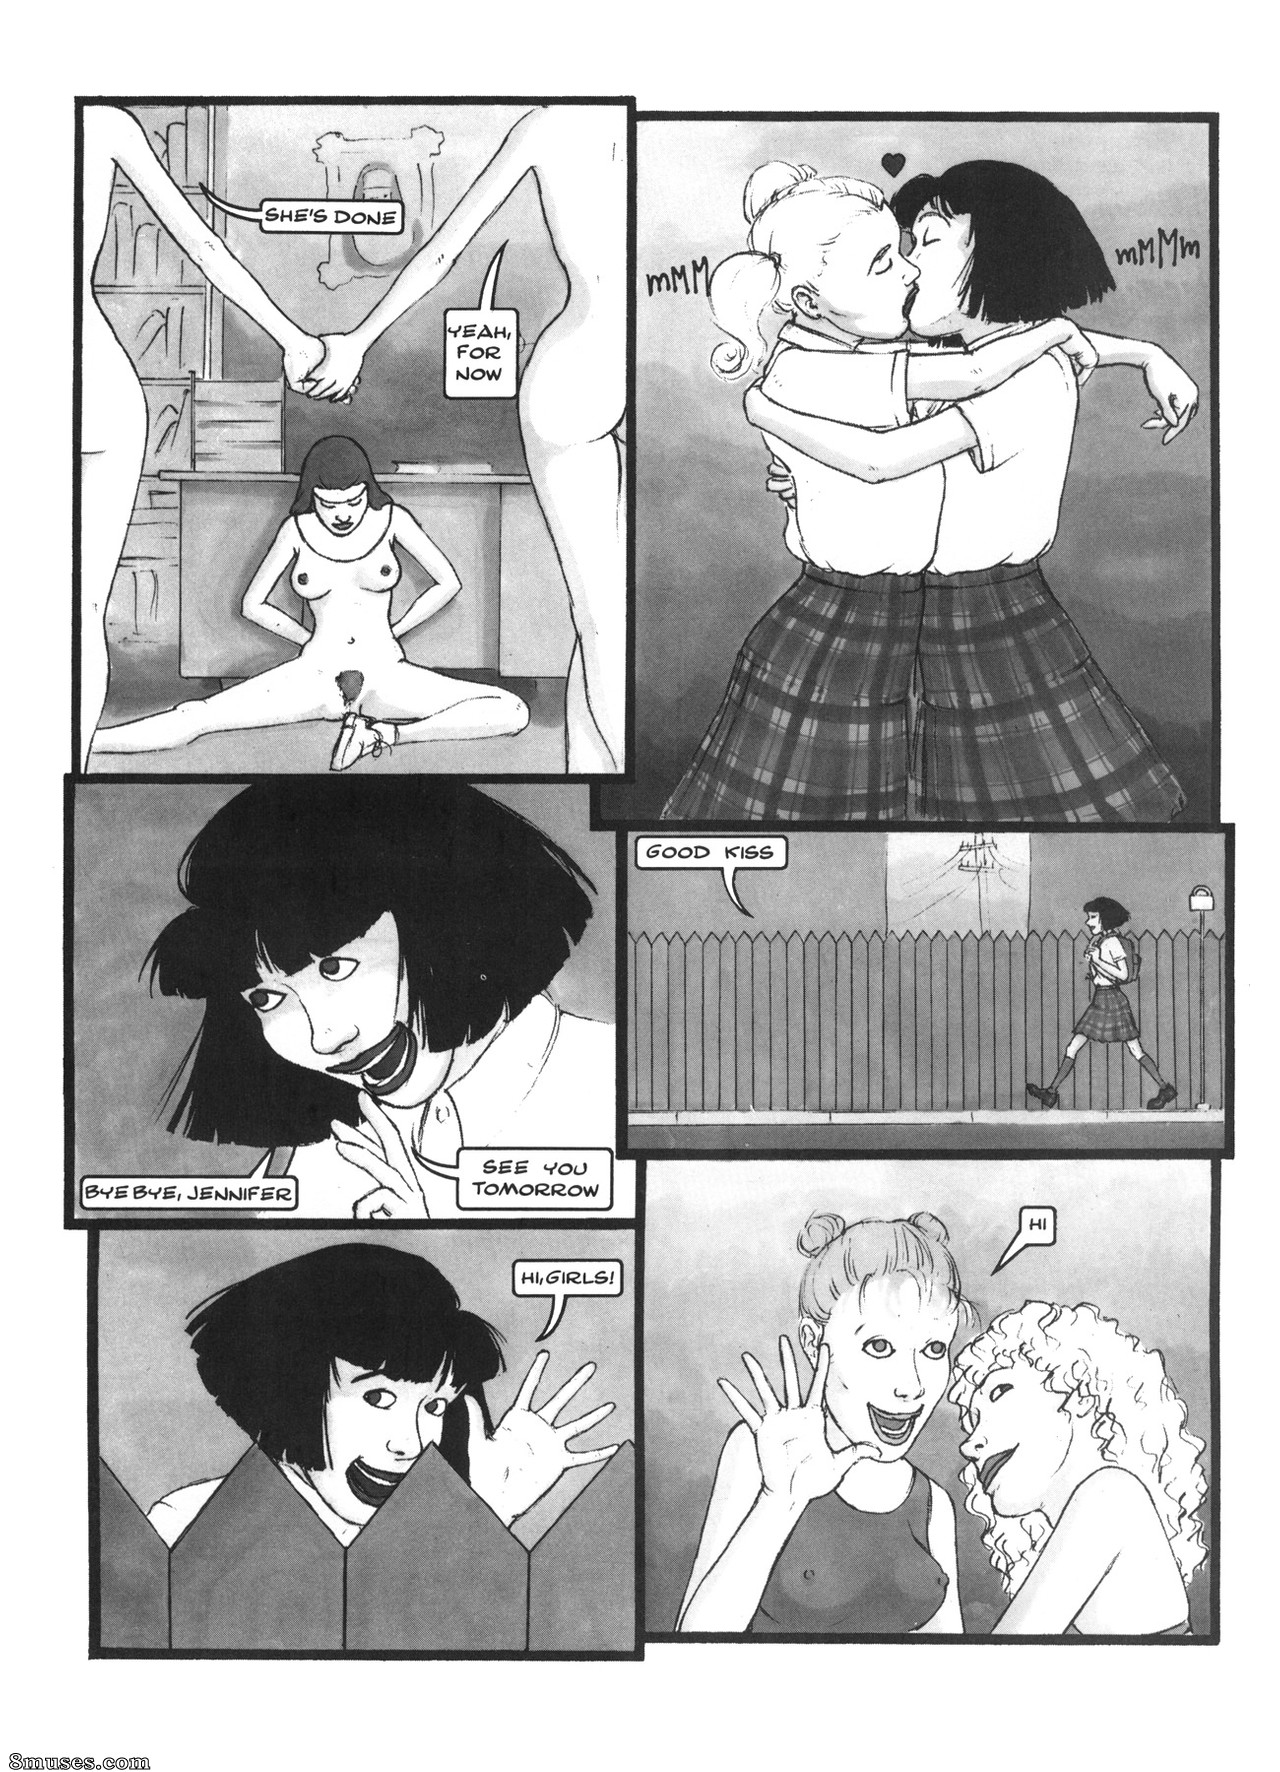 The Adventures of a Lesbian College School Girl Issue 1 - 8muses Comics -  Sex Comics and Porn Cartoons